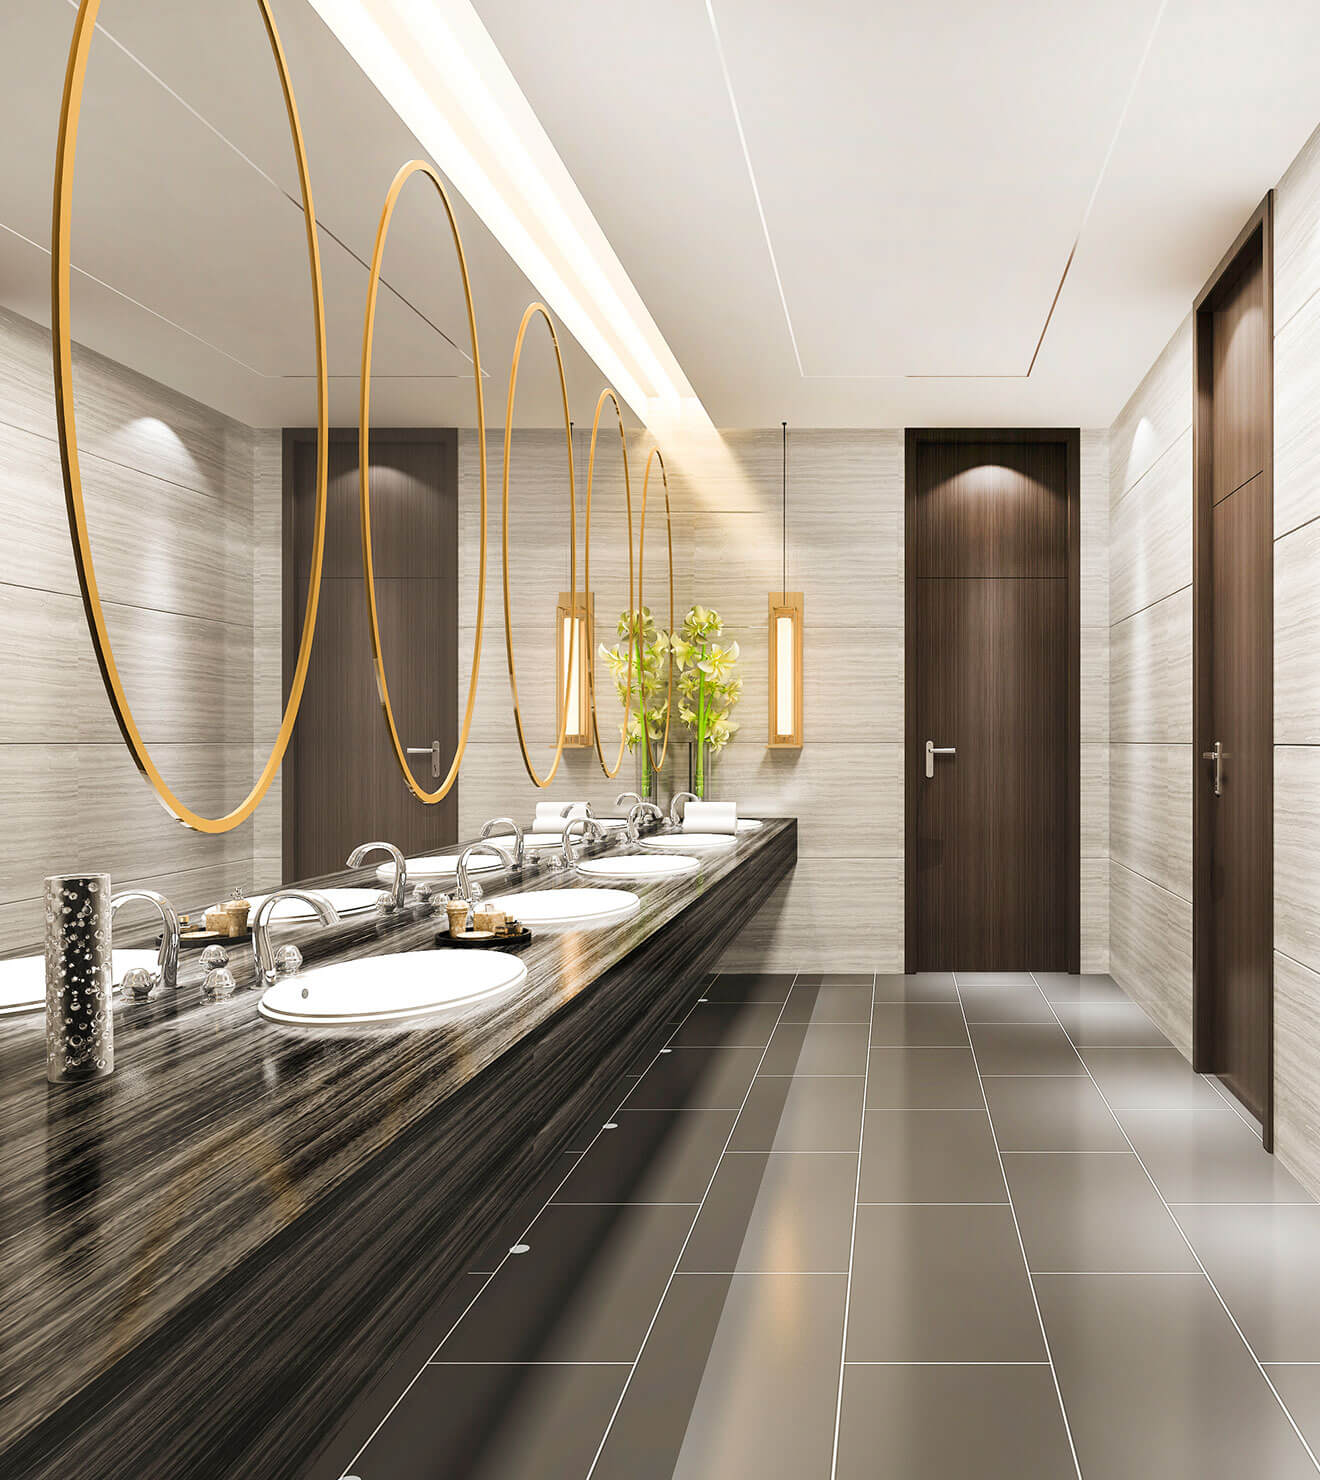 Spotless commercial bathroom showcasing tiles refreshed by Powerit's cleaning formula